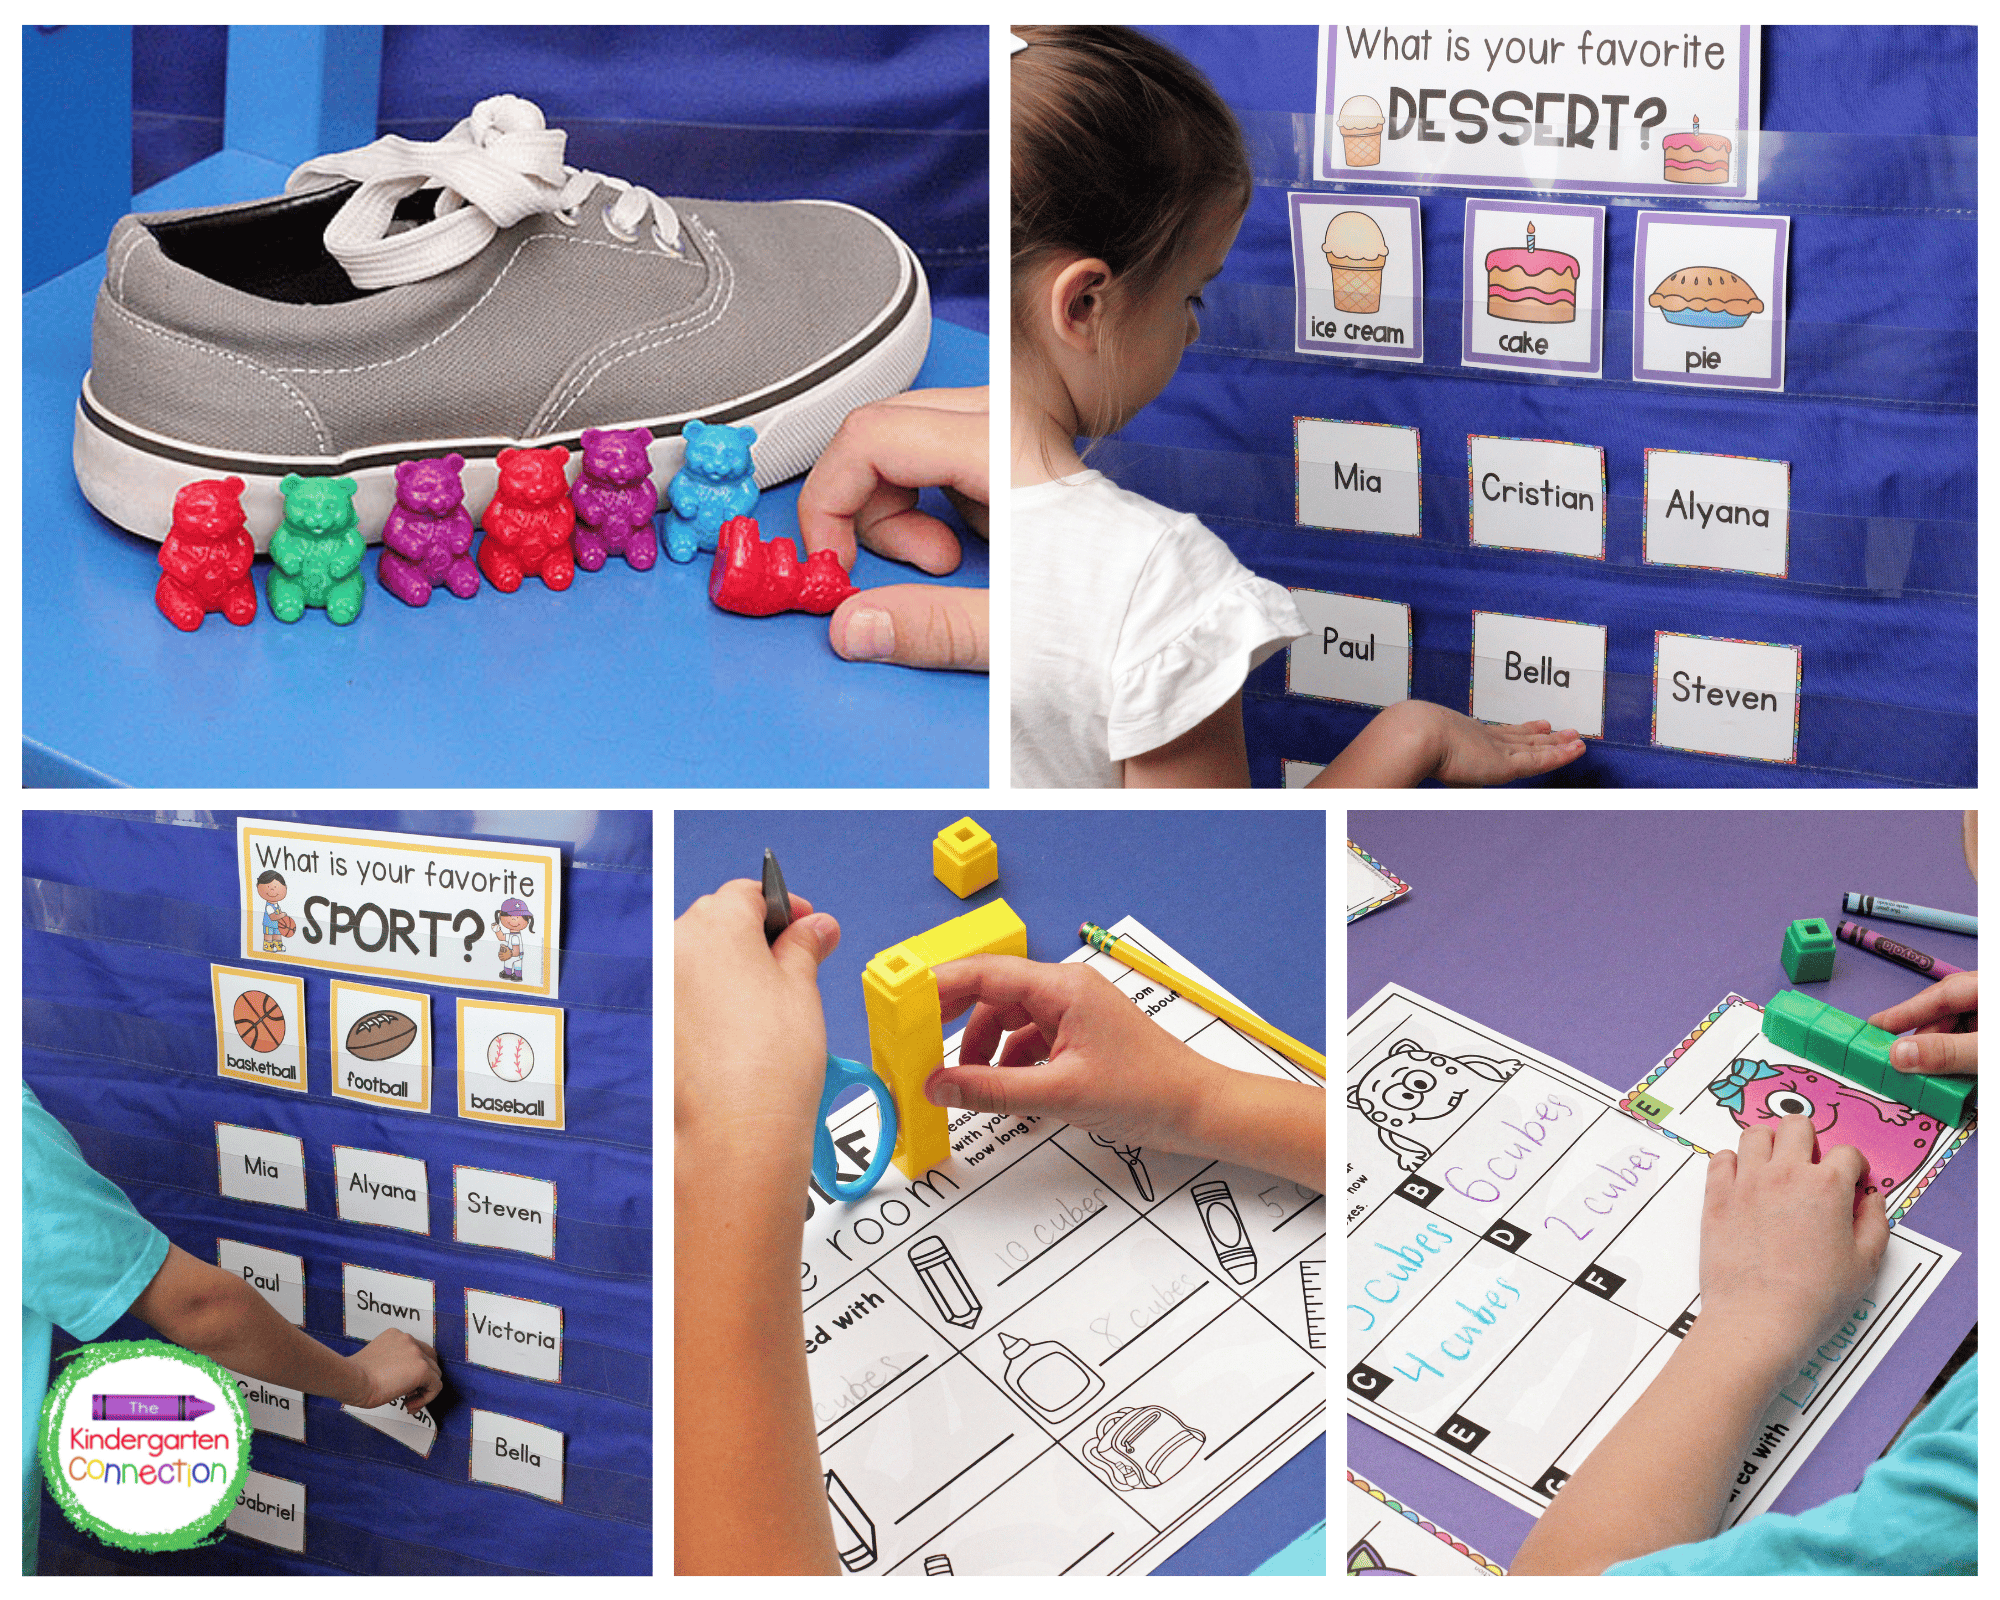 This pack includes 9 different graphing activities and 8 different measurement activities for hands-on learning.